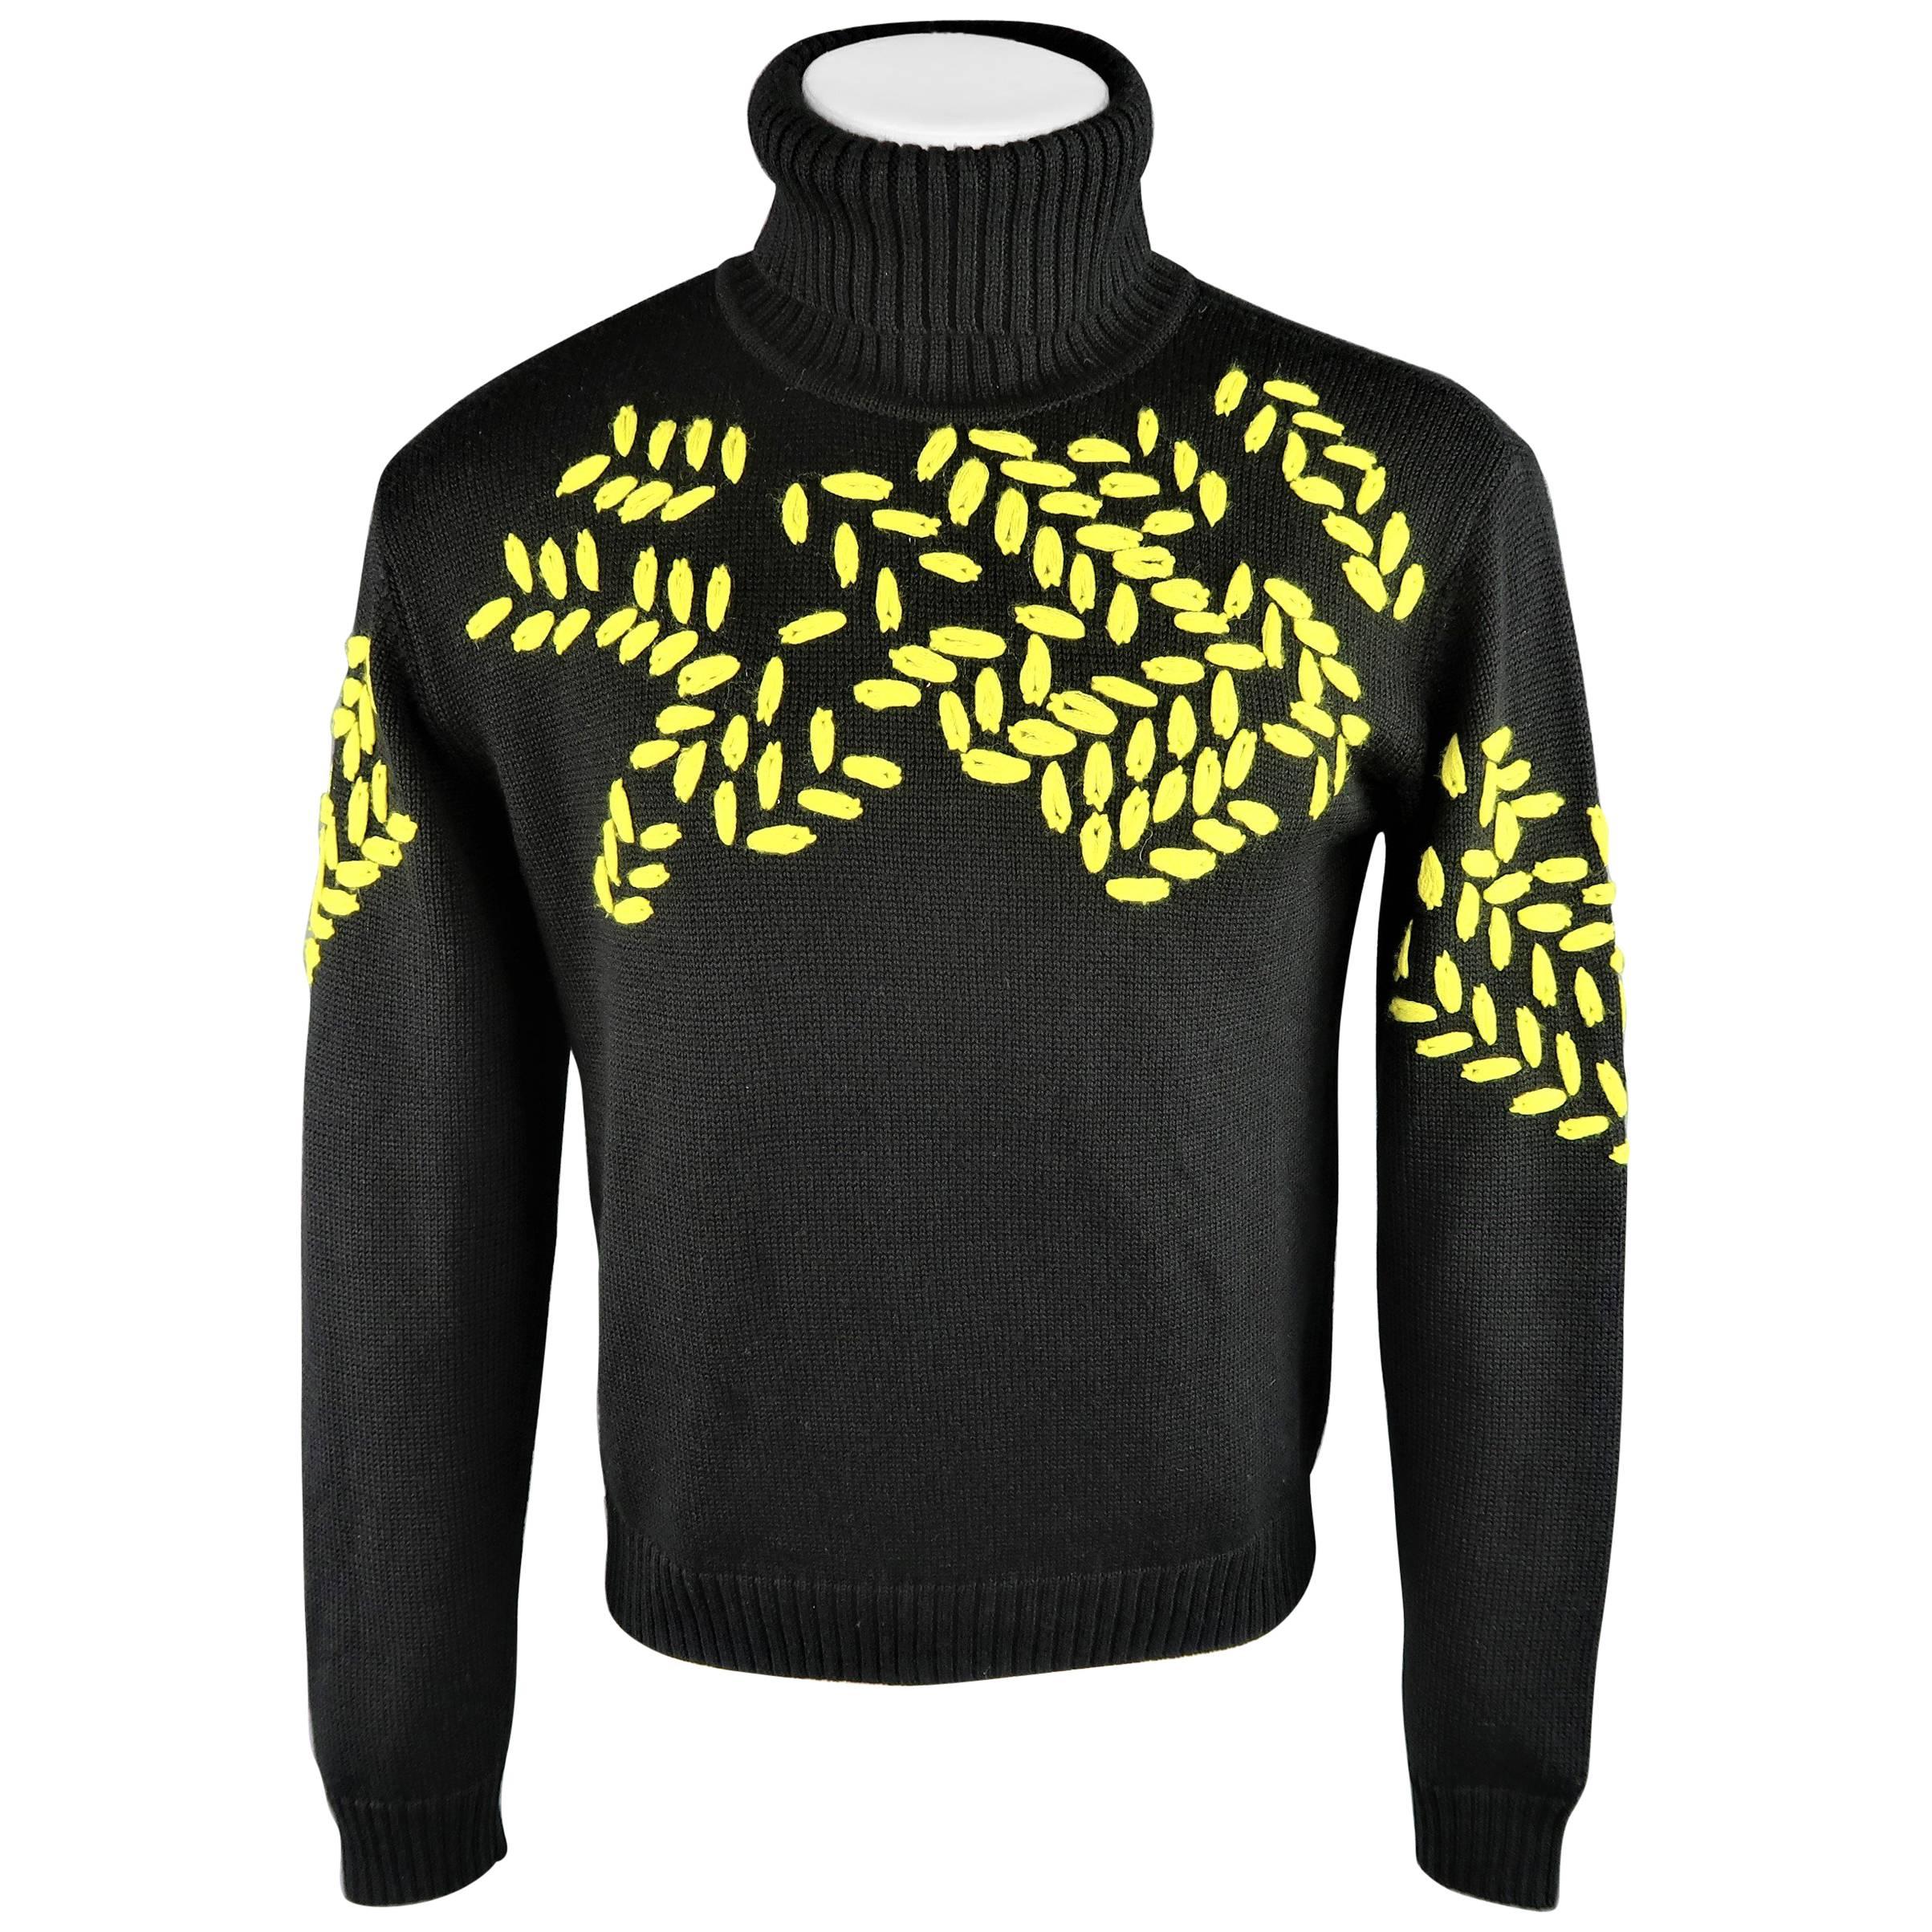 EMPORIO ARMANI EA7 S Black & Yellow Embroidered Wool Blend Turtleneck Sweater